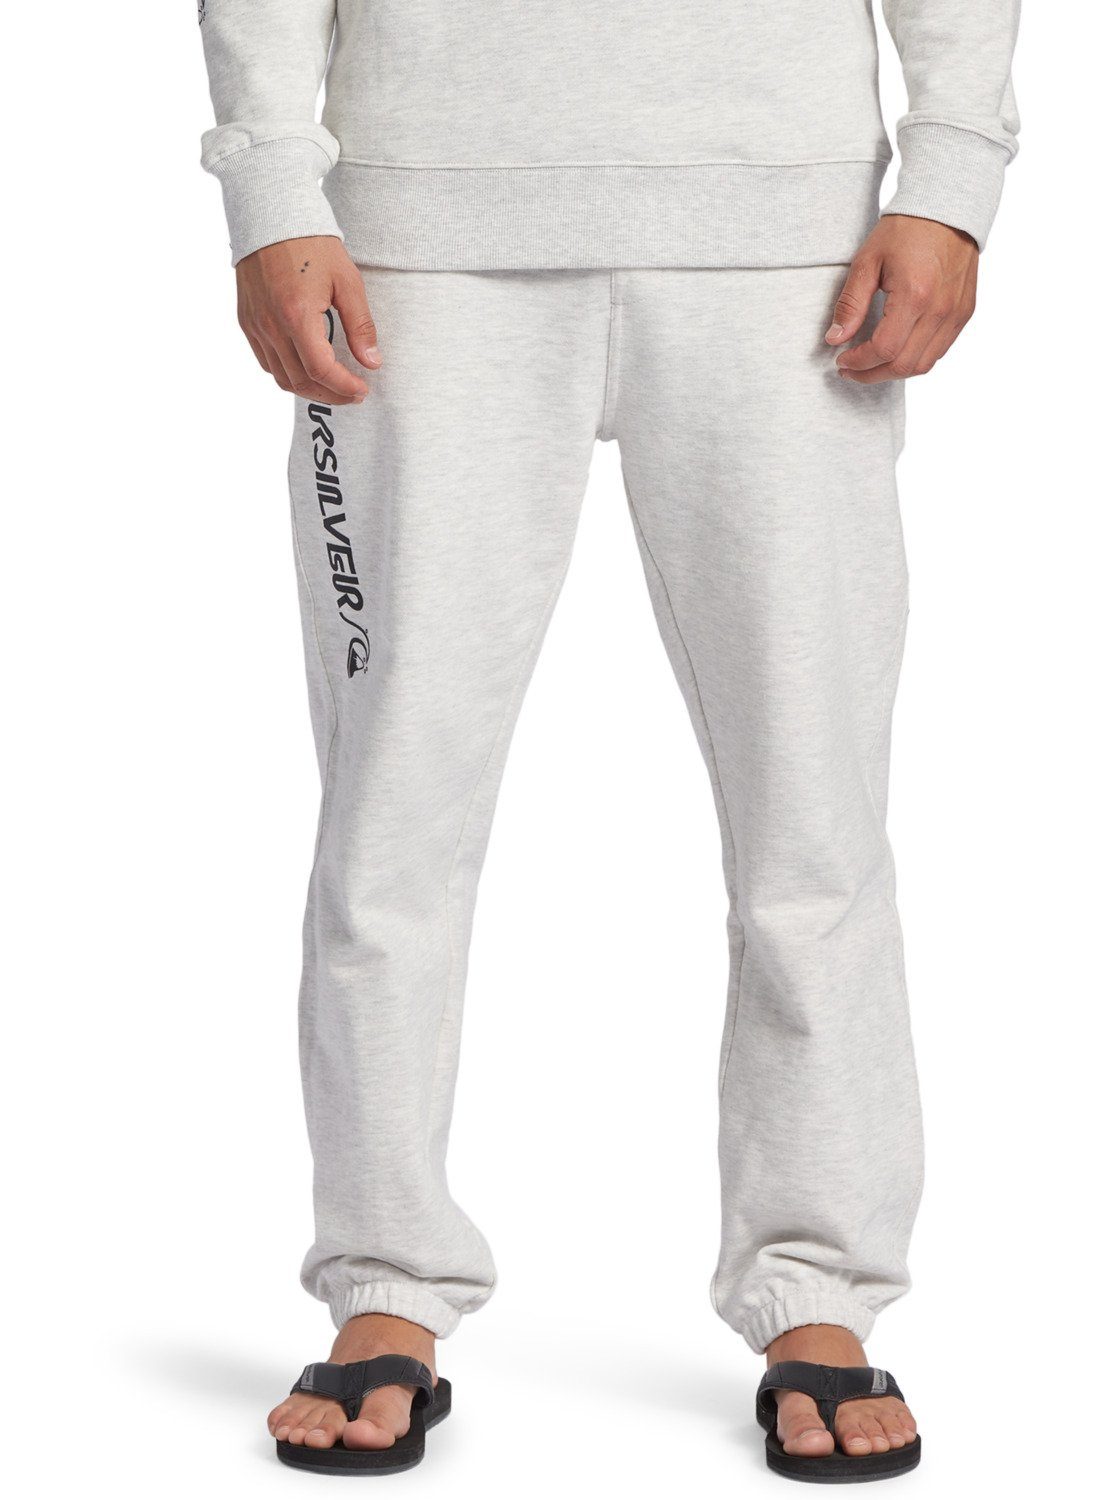 Quiksilver Jogger Pants The Original White Marble Heather